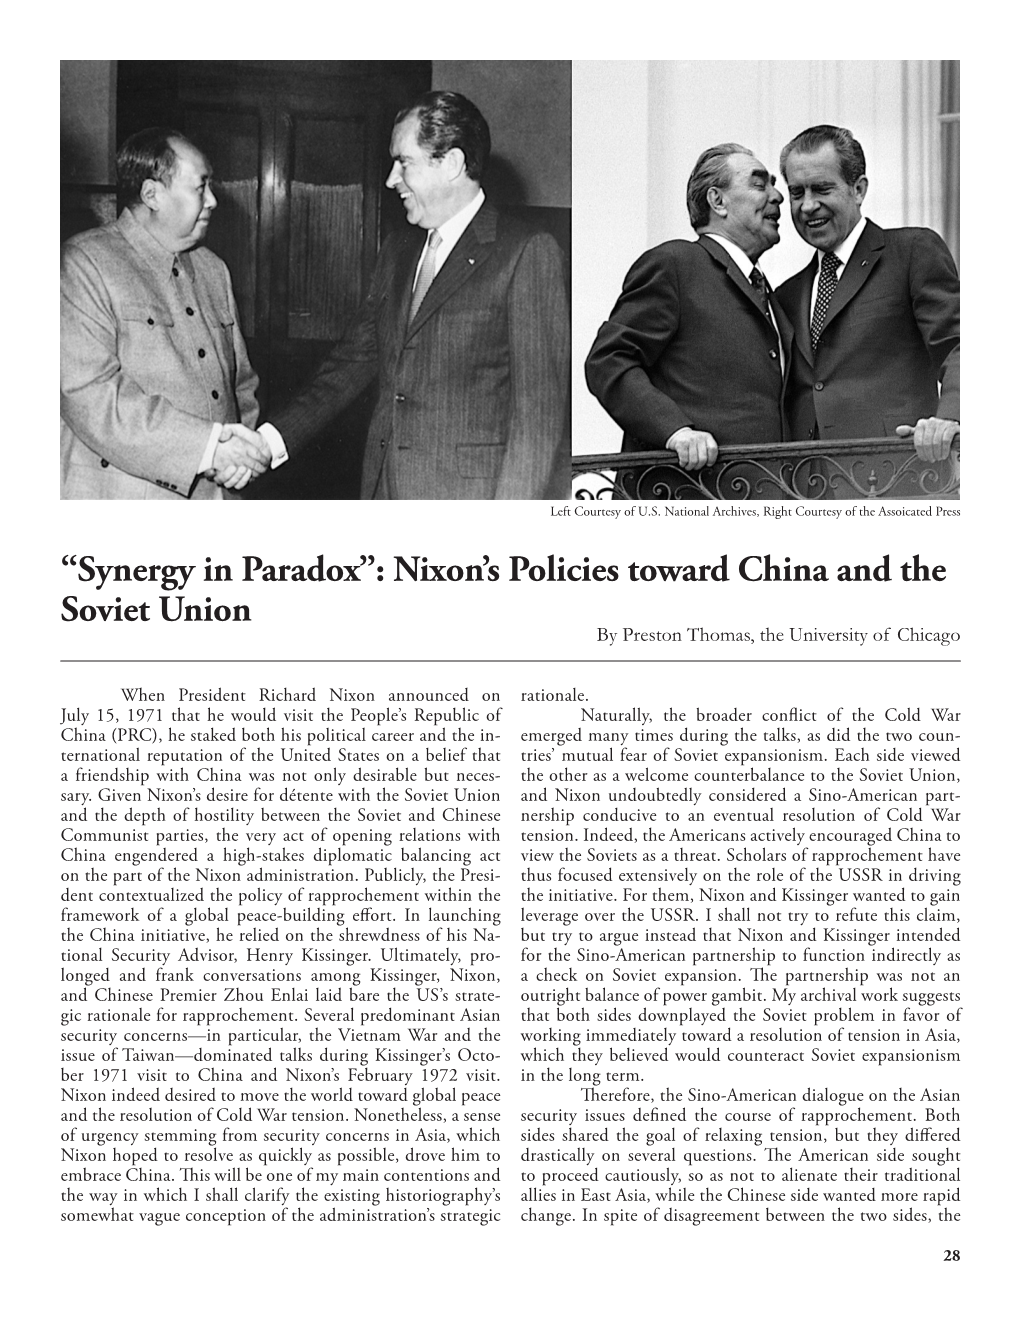 “Synergy in Paradox”: Nixon's Policies Toward China and the Soviet Union